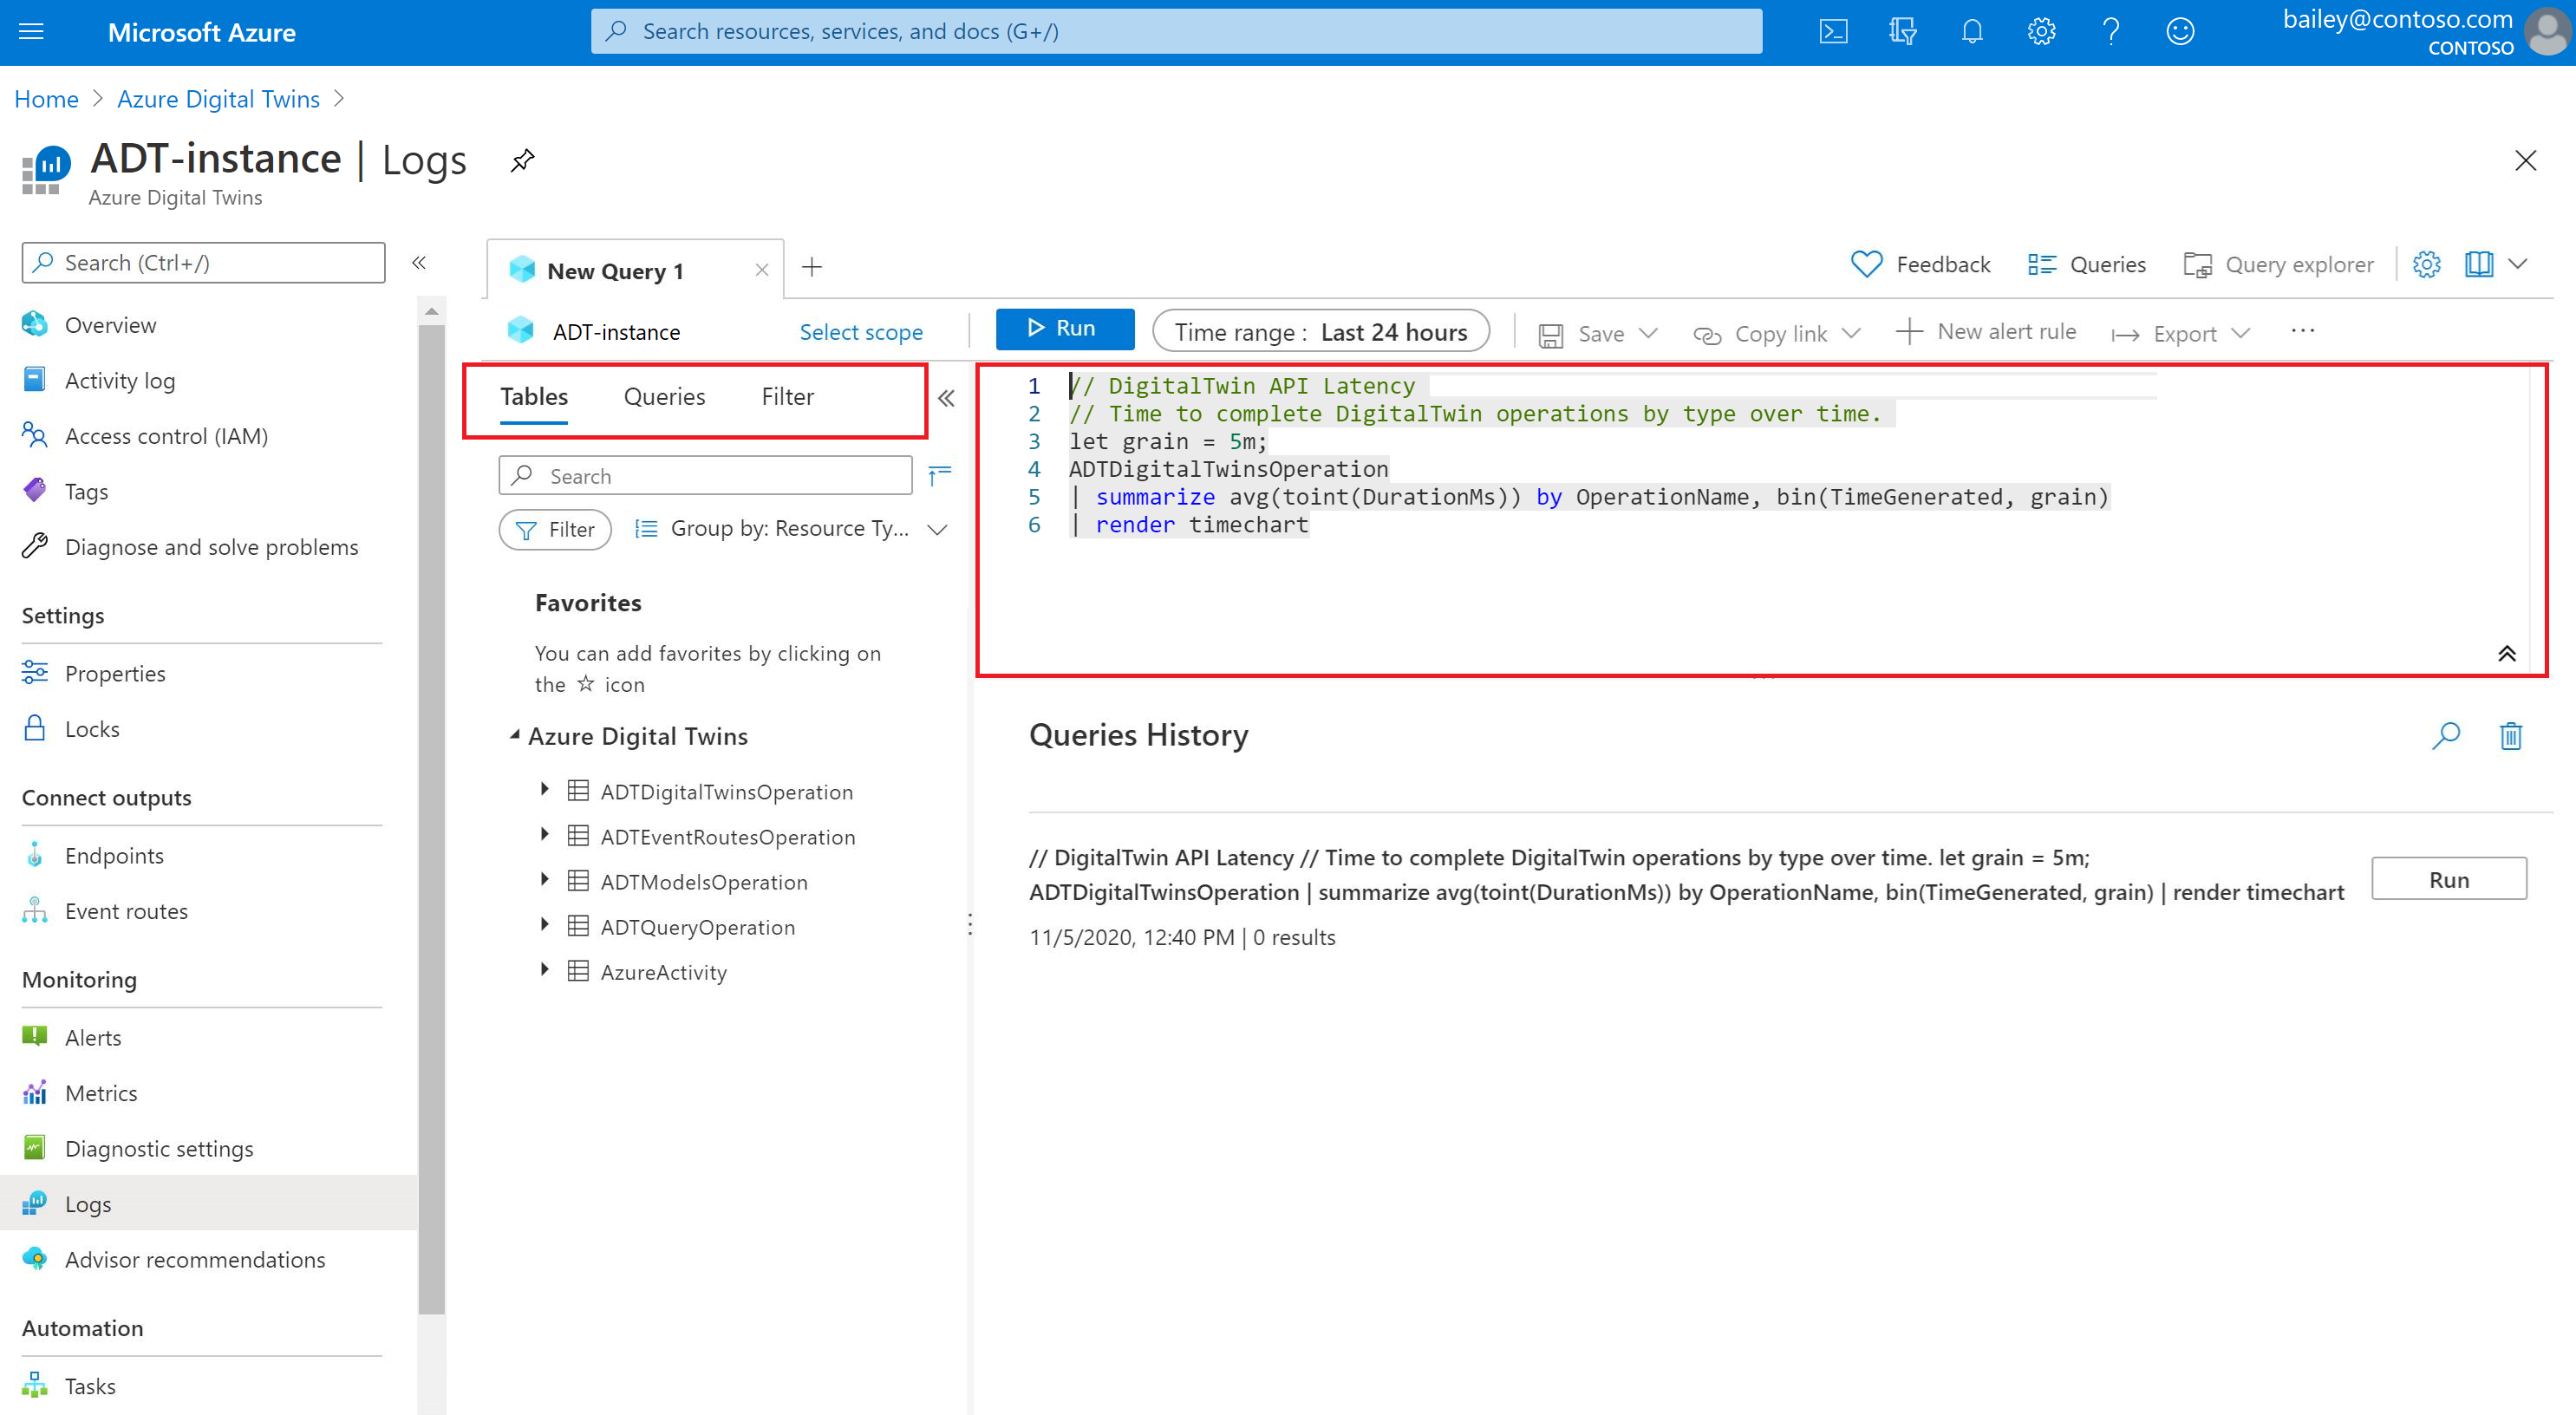 Screenshot showing the Logs page for an Azure Digital Twins instance in the Azure portal. It includes a list of logs, query code, and Queries History.